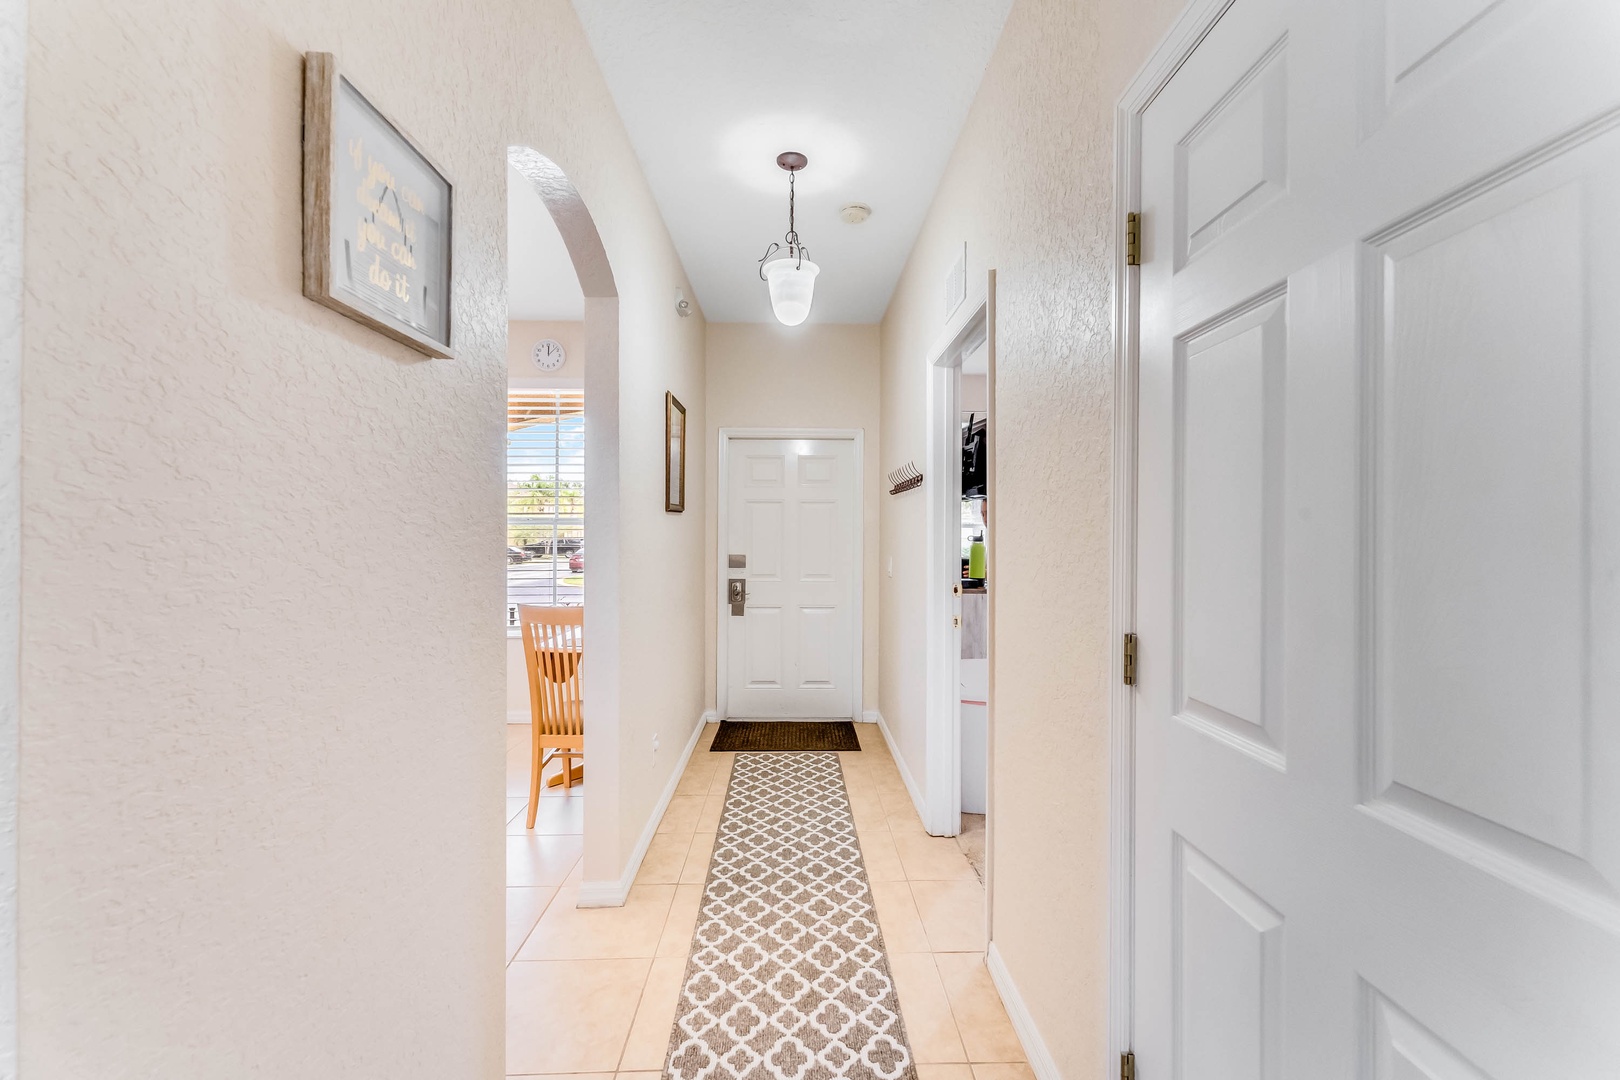 A bright entryway will welcome you home